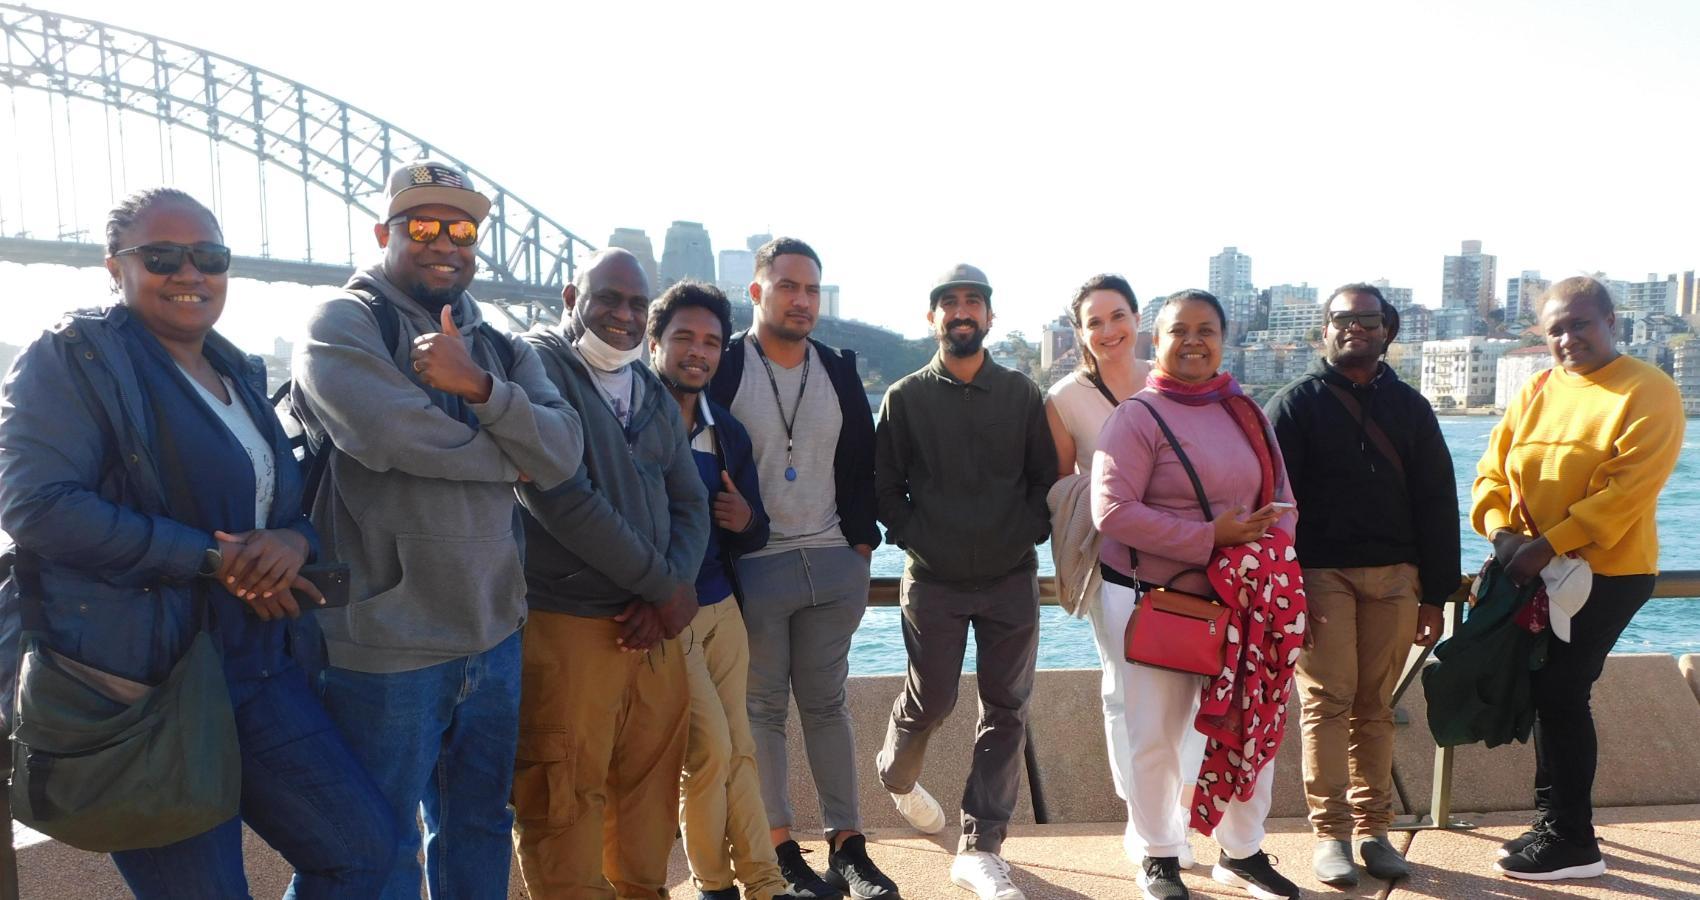 A group of people pose in front of the Harbour Bridge in Sydney